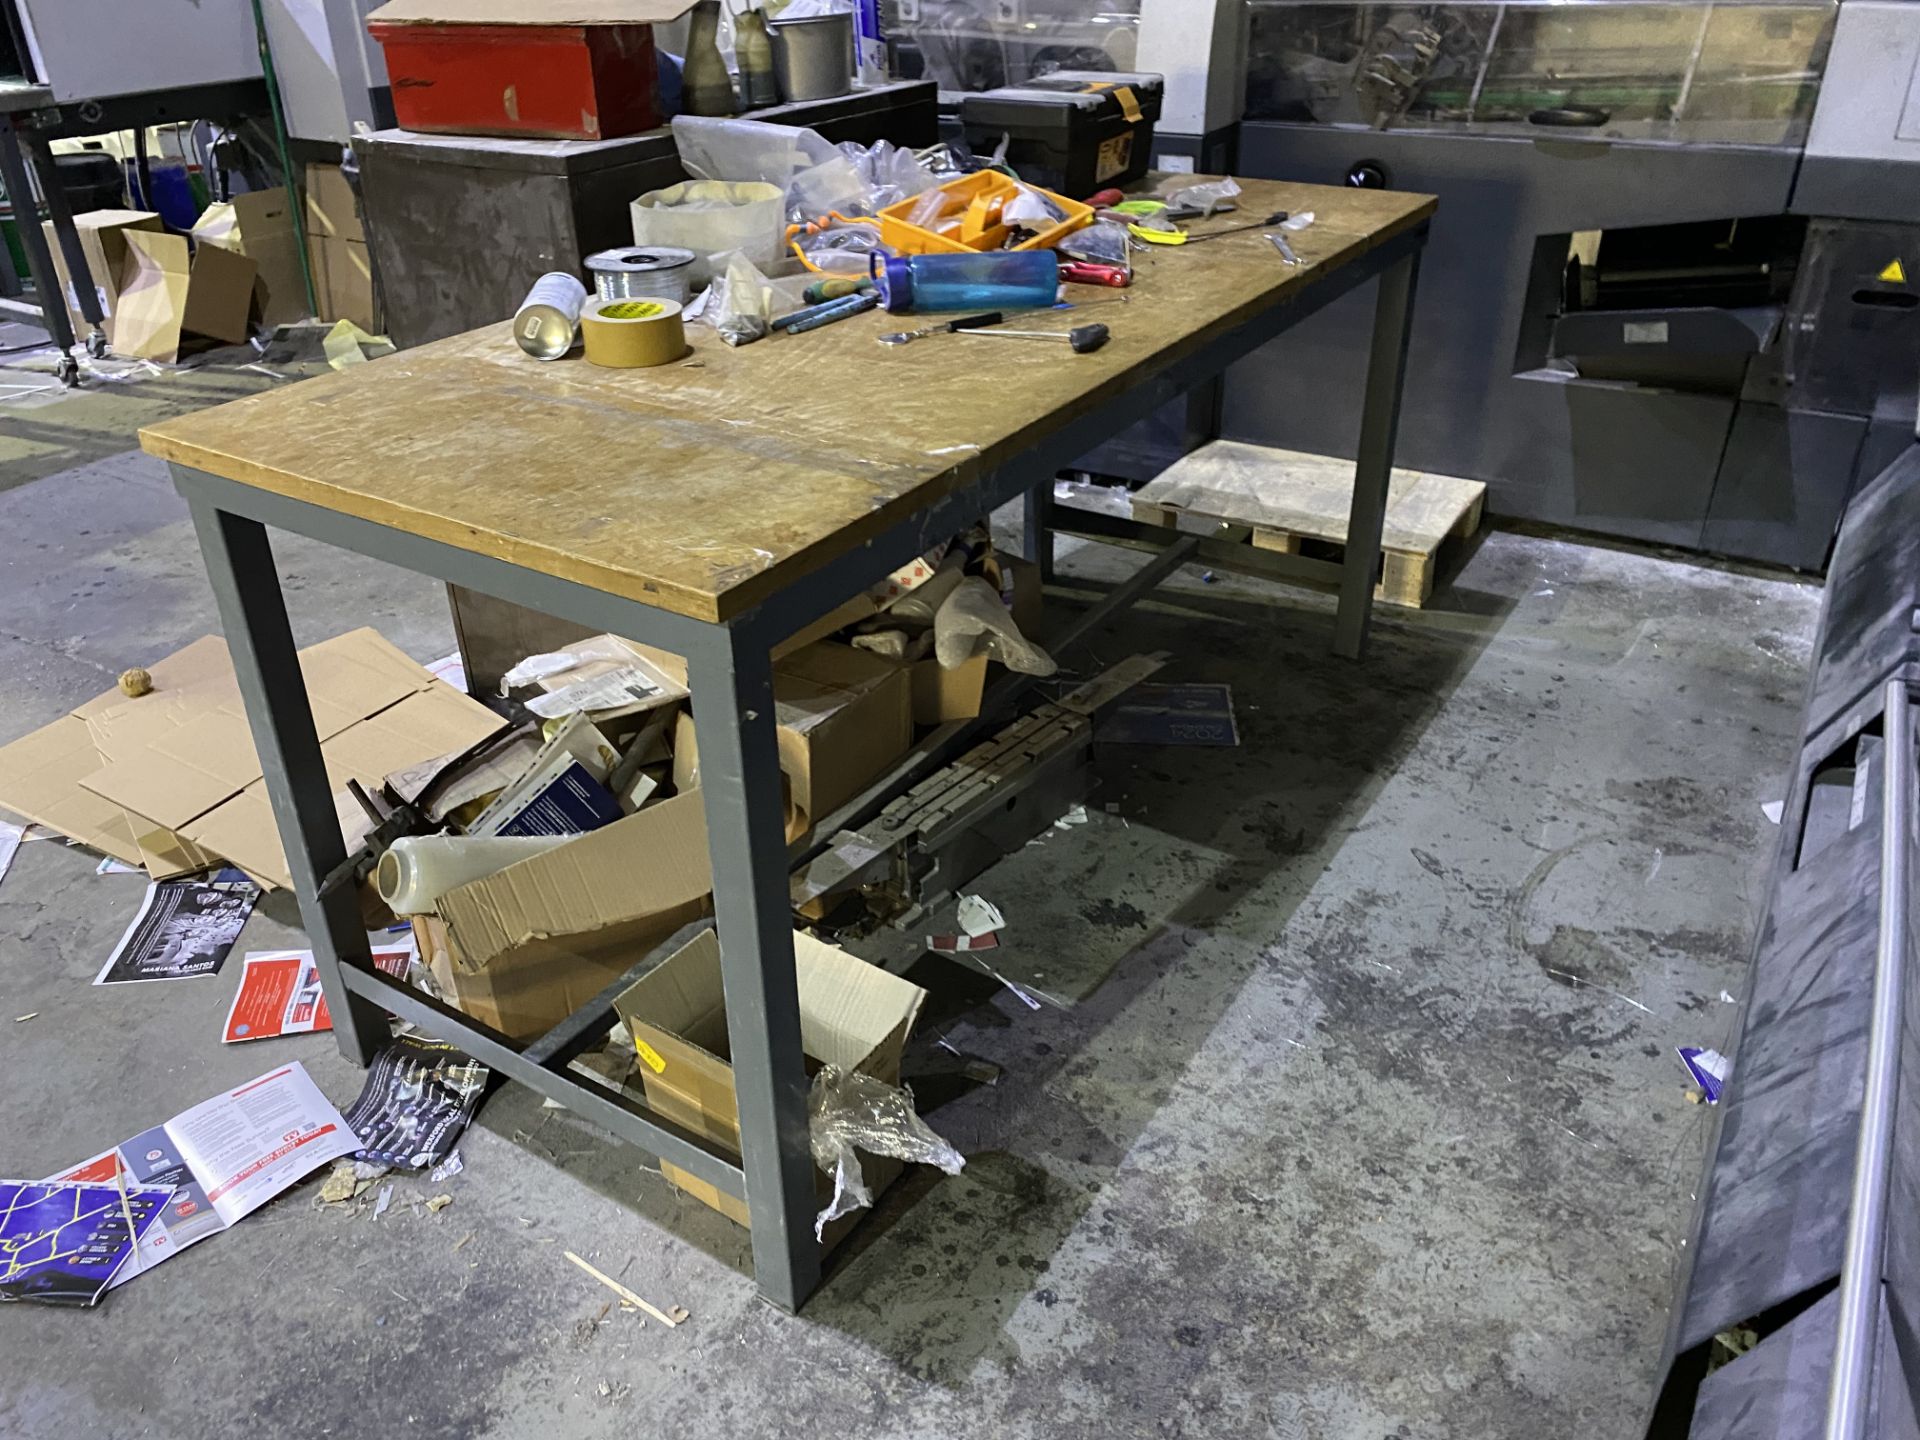 Four metal framed timber topped work benches